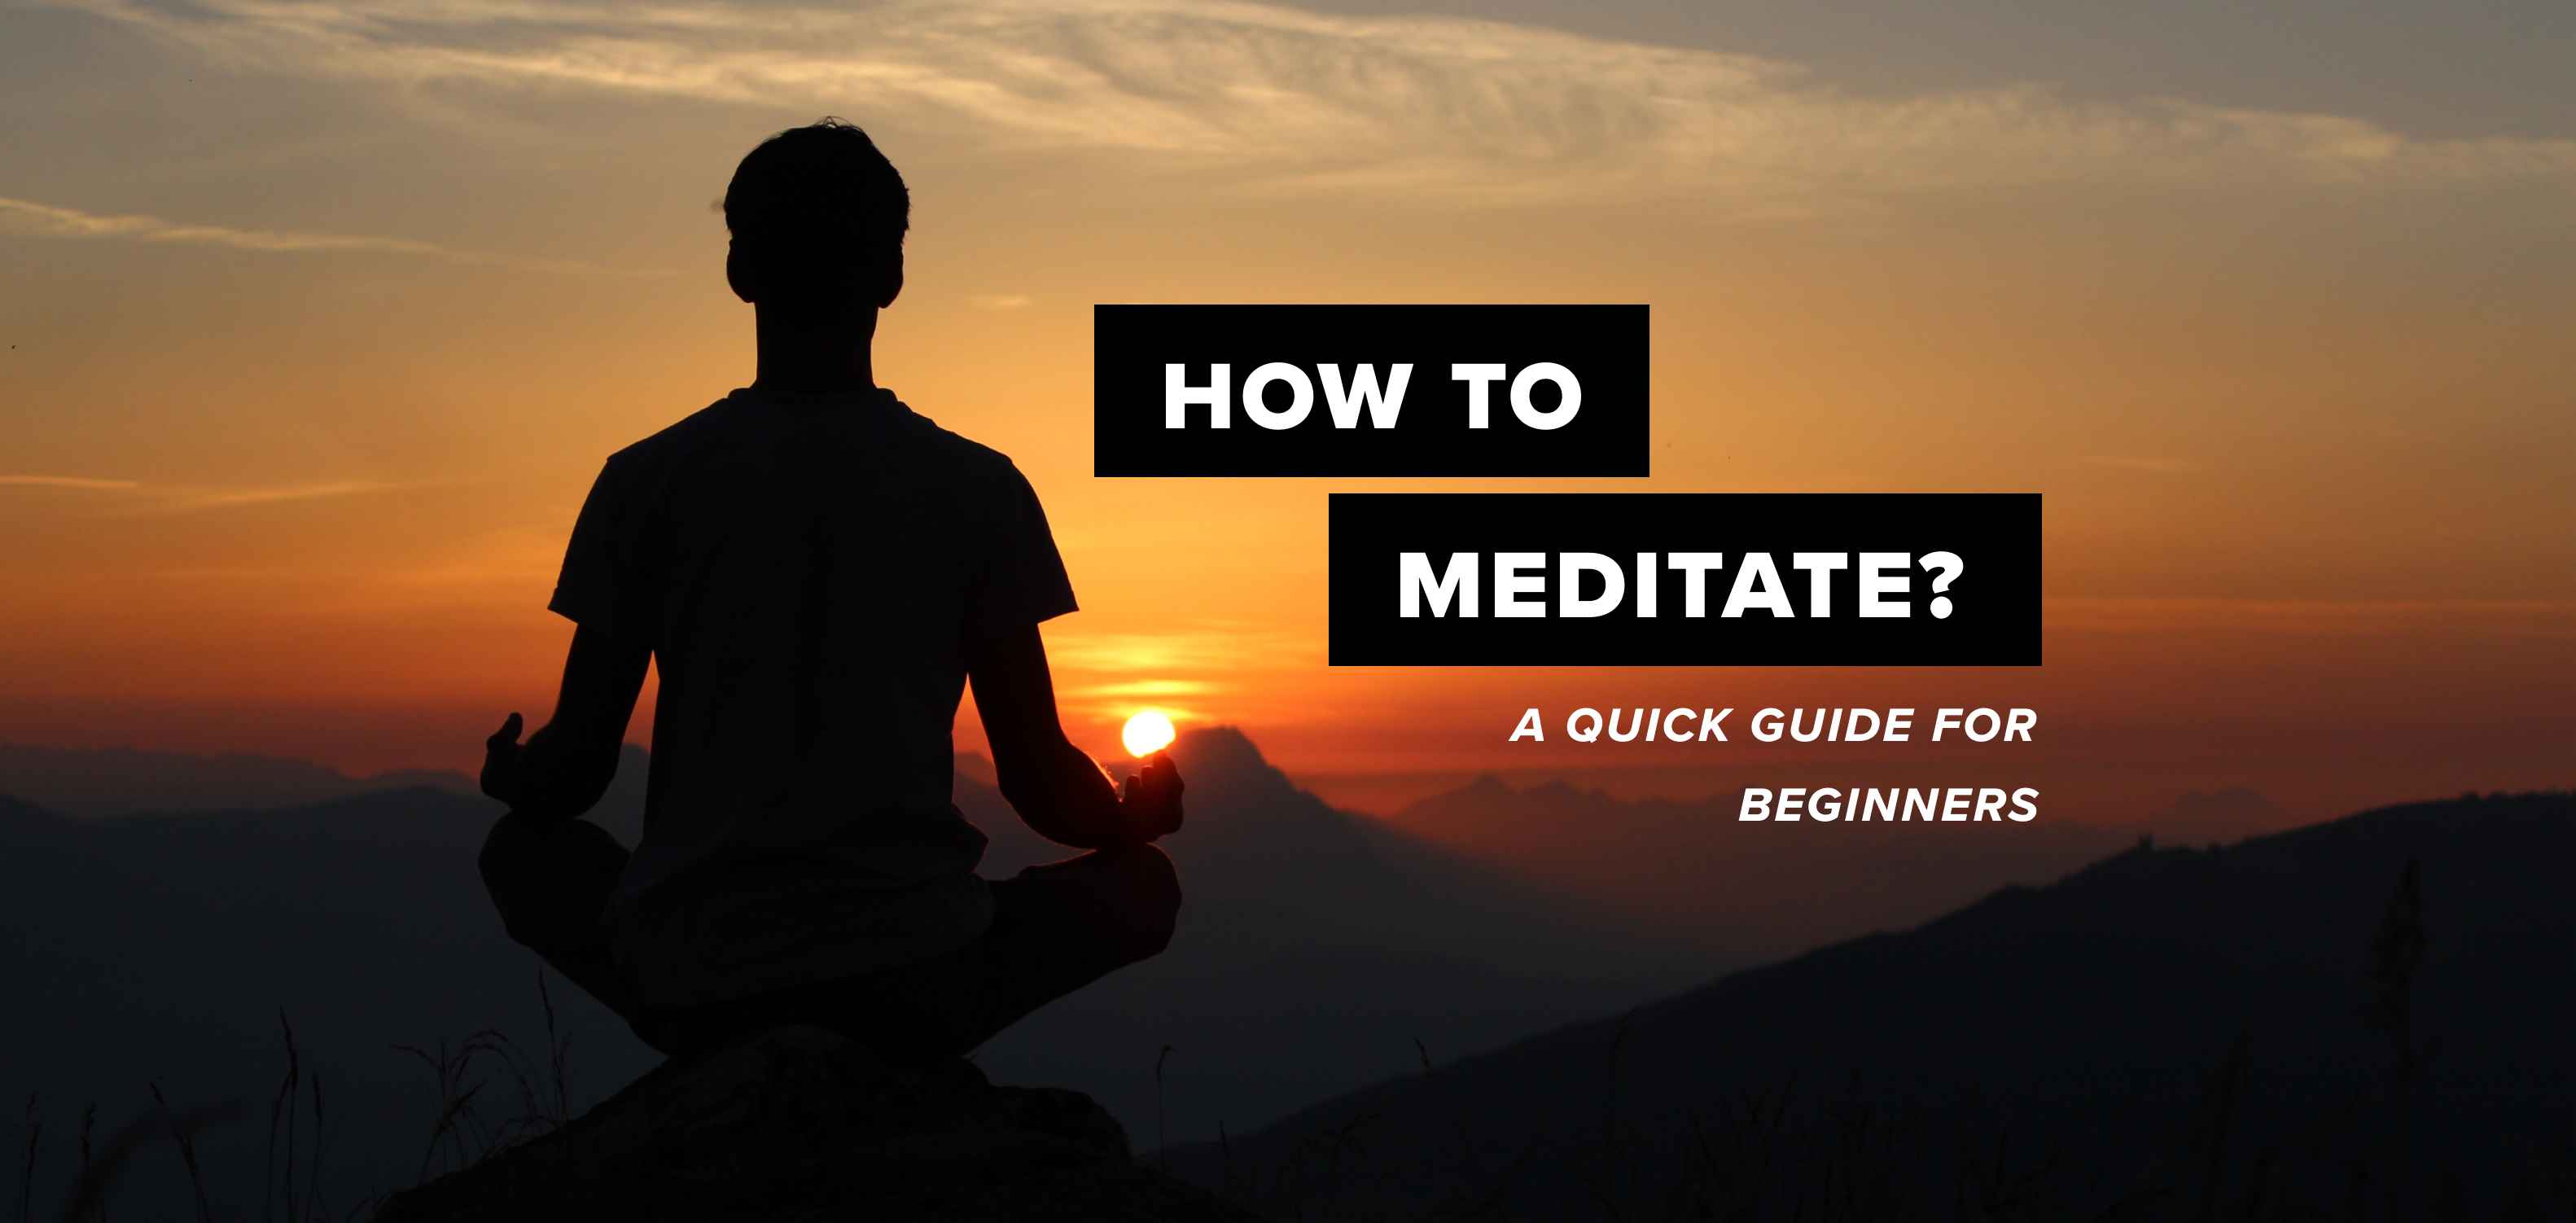 How to Meditate: A Quick Guide for Beginners